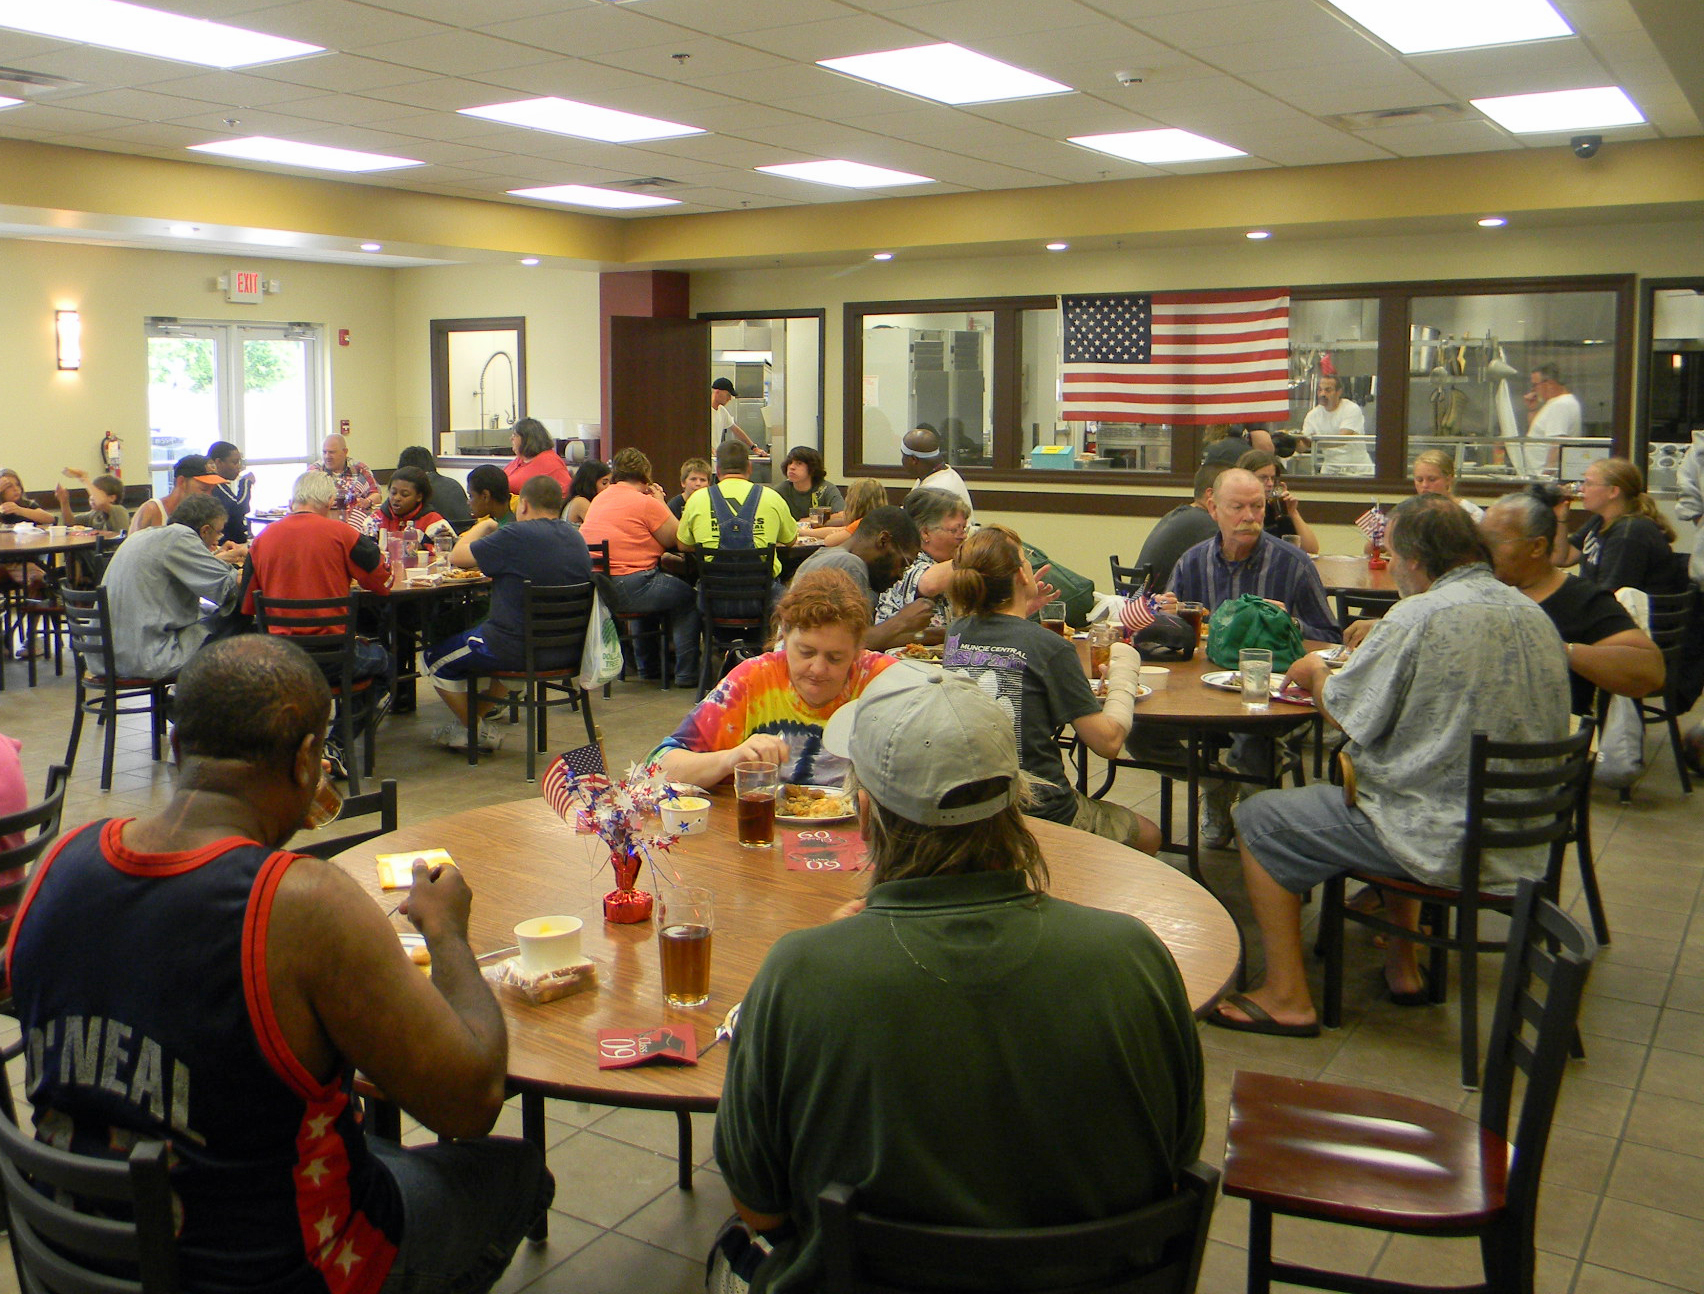 Free Community Lunch in Mission dining room